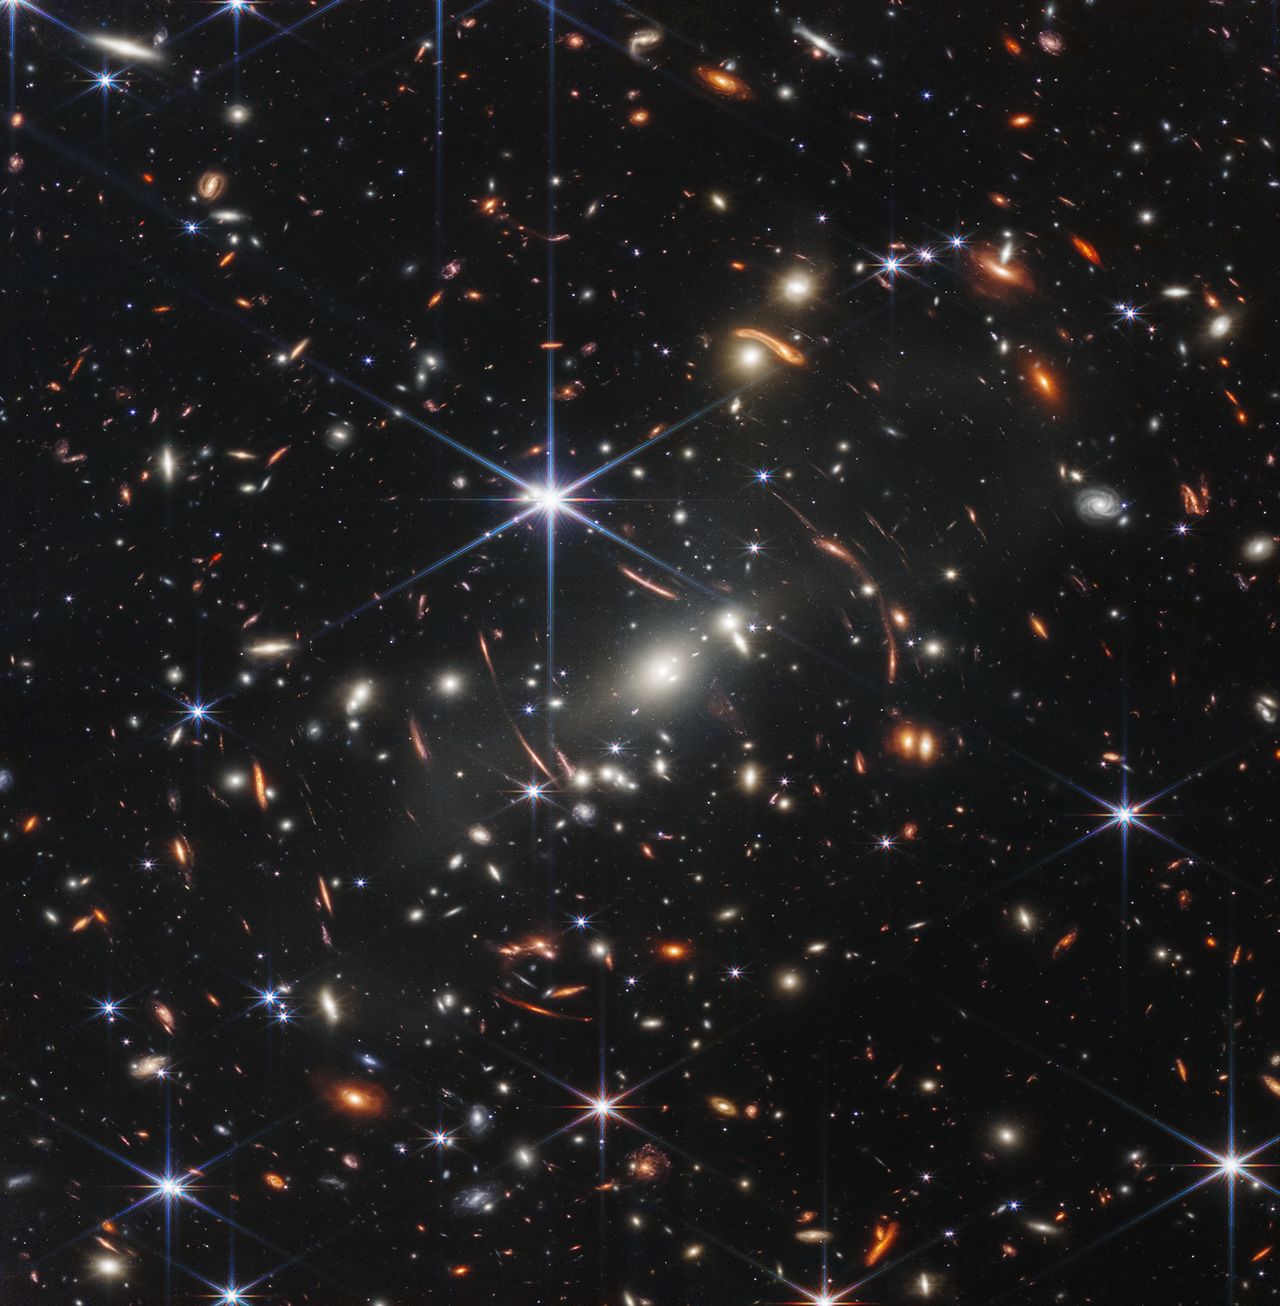 Thousands of galaxies flood this near-infrared image of galaxy cluster SMACS 0723.